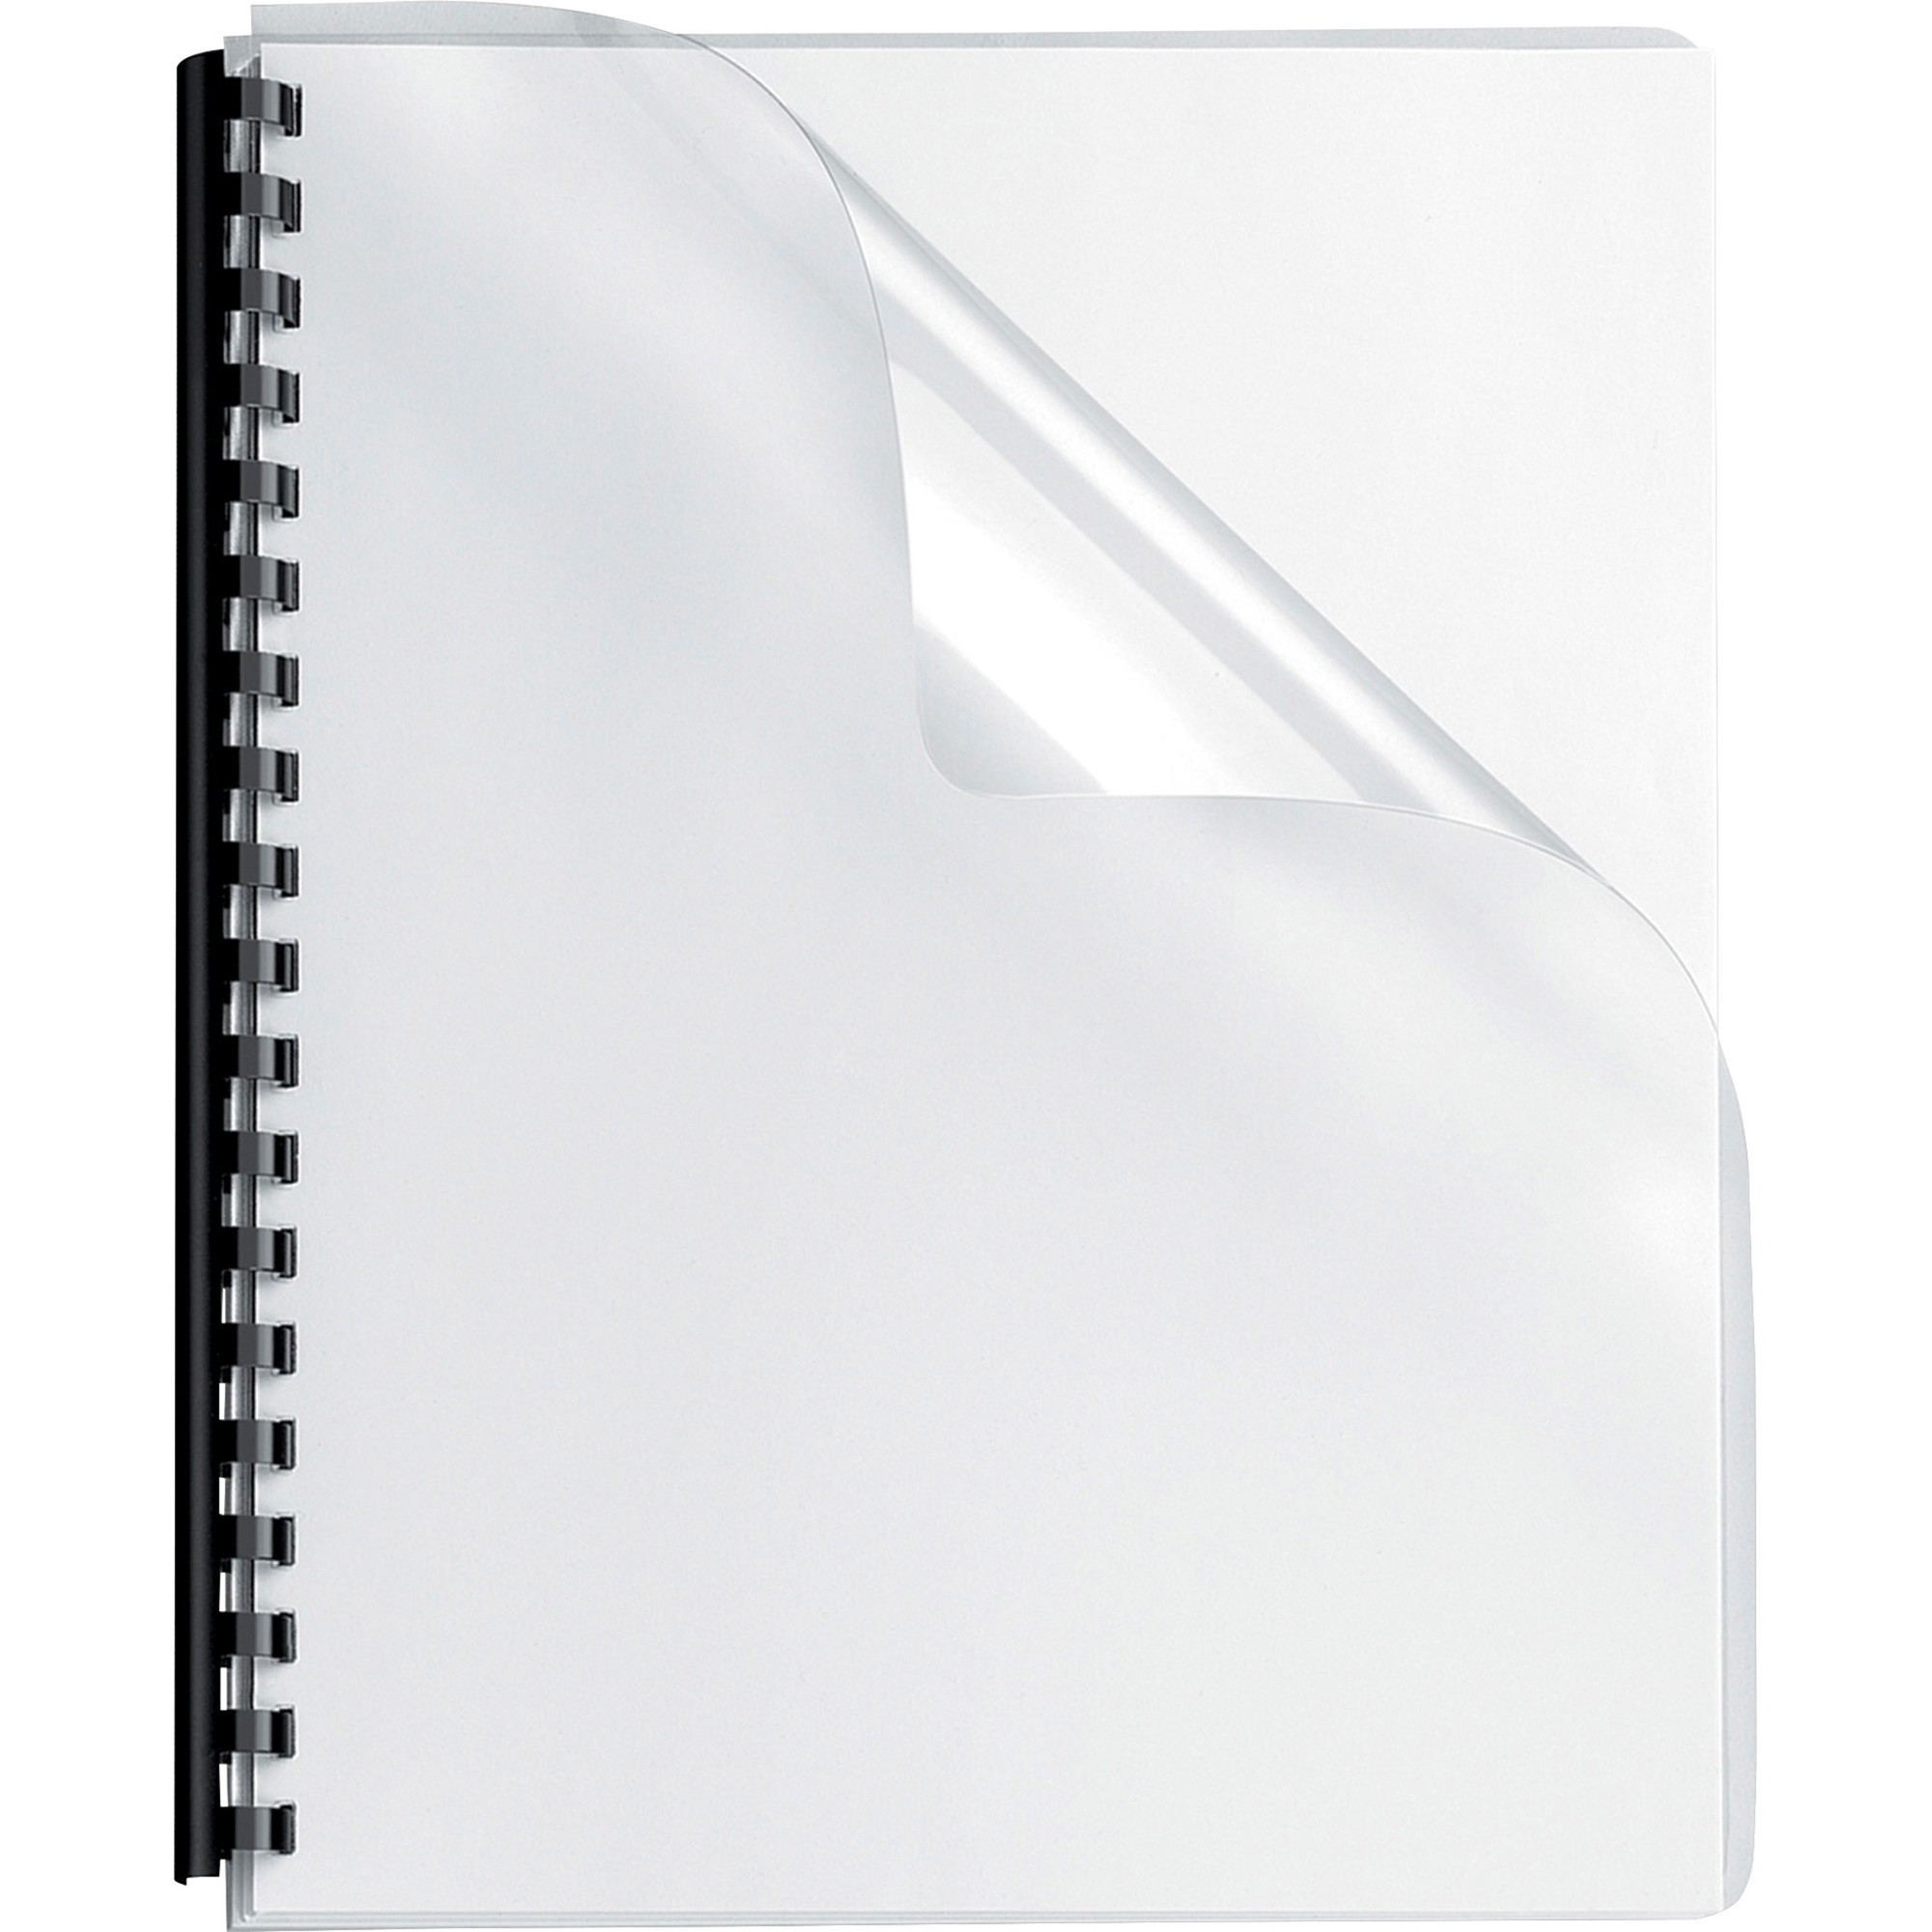 Fellowes Crystals Clear Oversize PVC Covers - 11.3" Height x 8.8" Width x 0" Depth - 8 3/4" x 11 1/4" Sheet - Rectangular - Clea